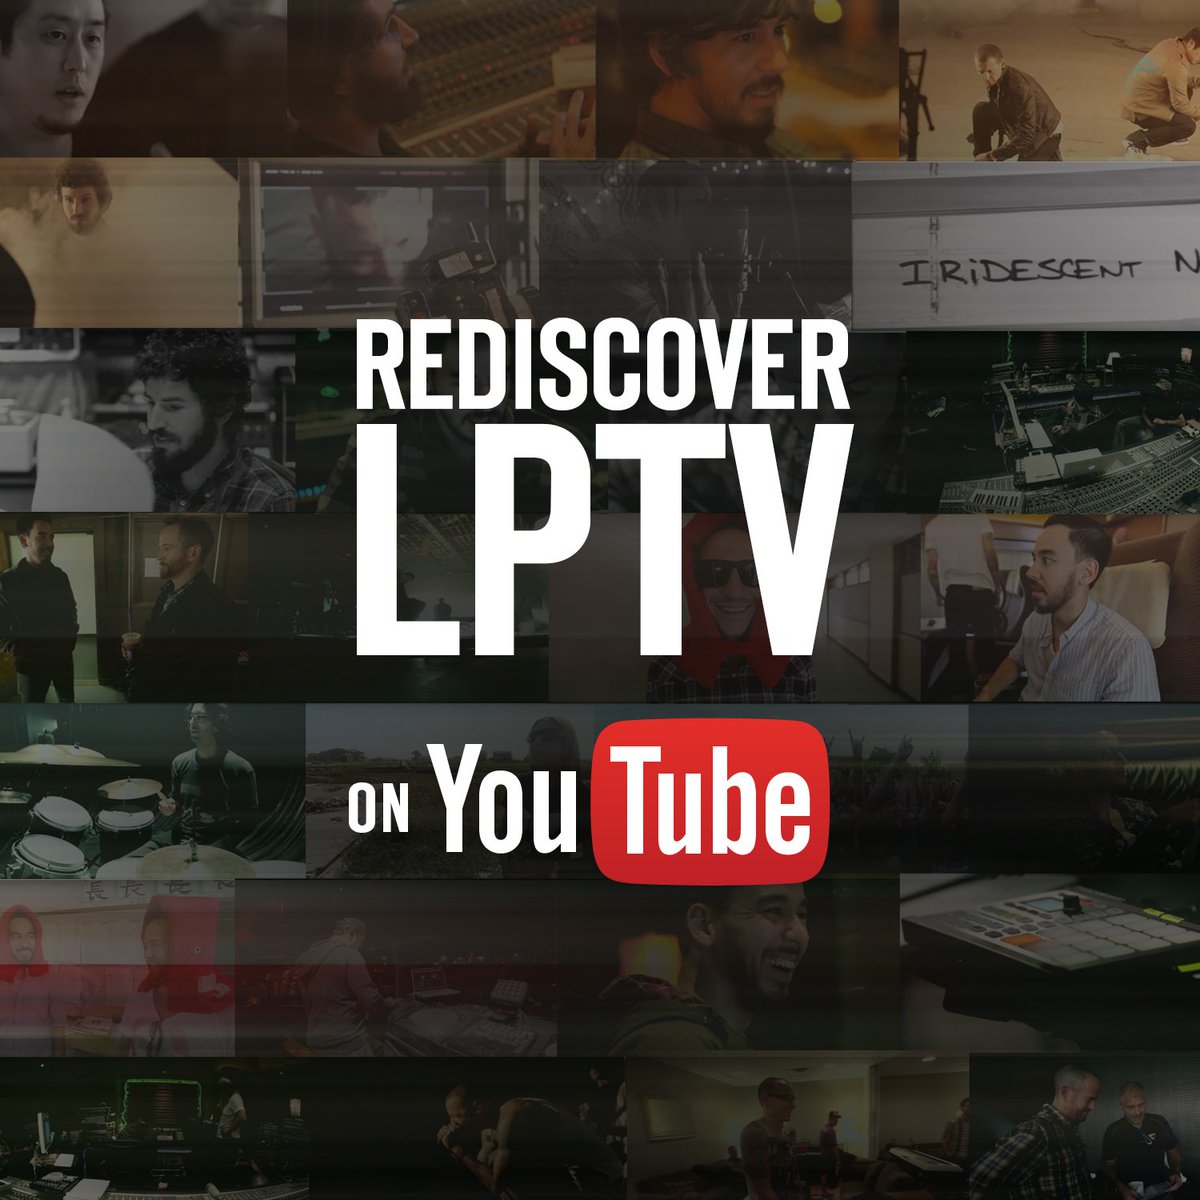 RT @linkinpark: Rediscover #LPTV on @YouTube, now organized by season from 2003 - 2015. Watch: https://t.co/6DZEXgZq2Q https://t.co/09JWZMd…